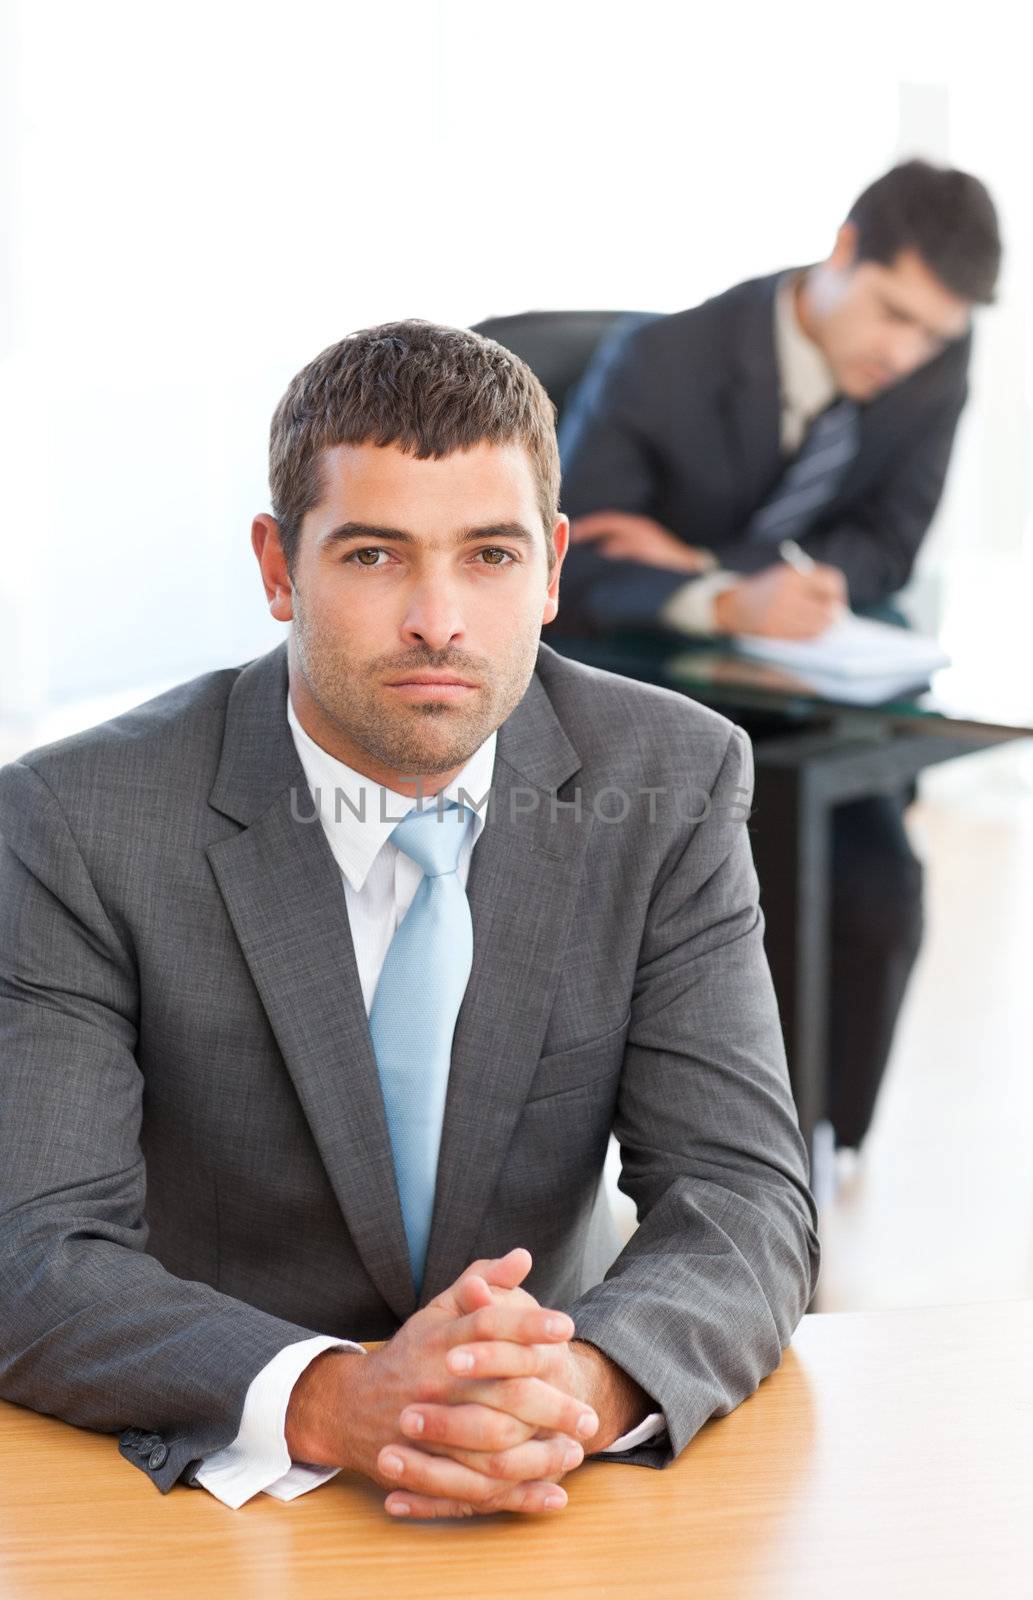 Charismatic businessman sitting in the foreground while his colleague is working at a table